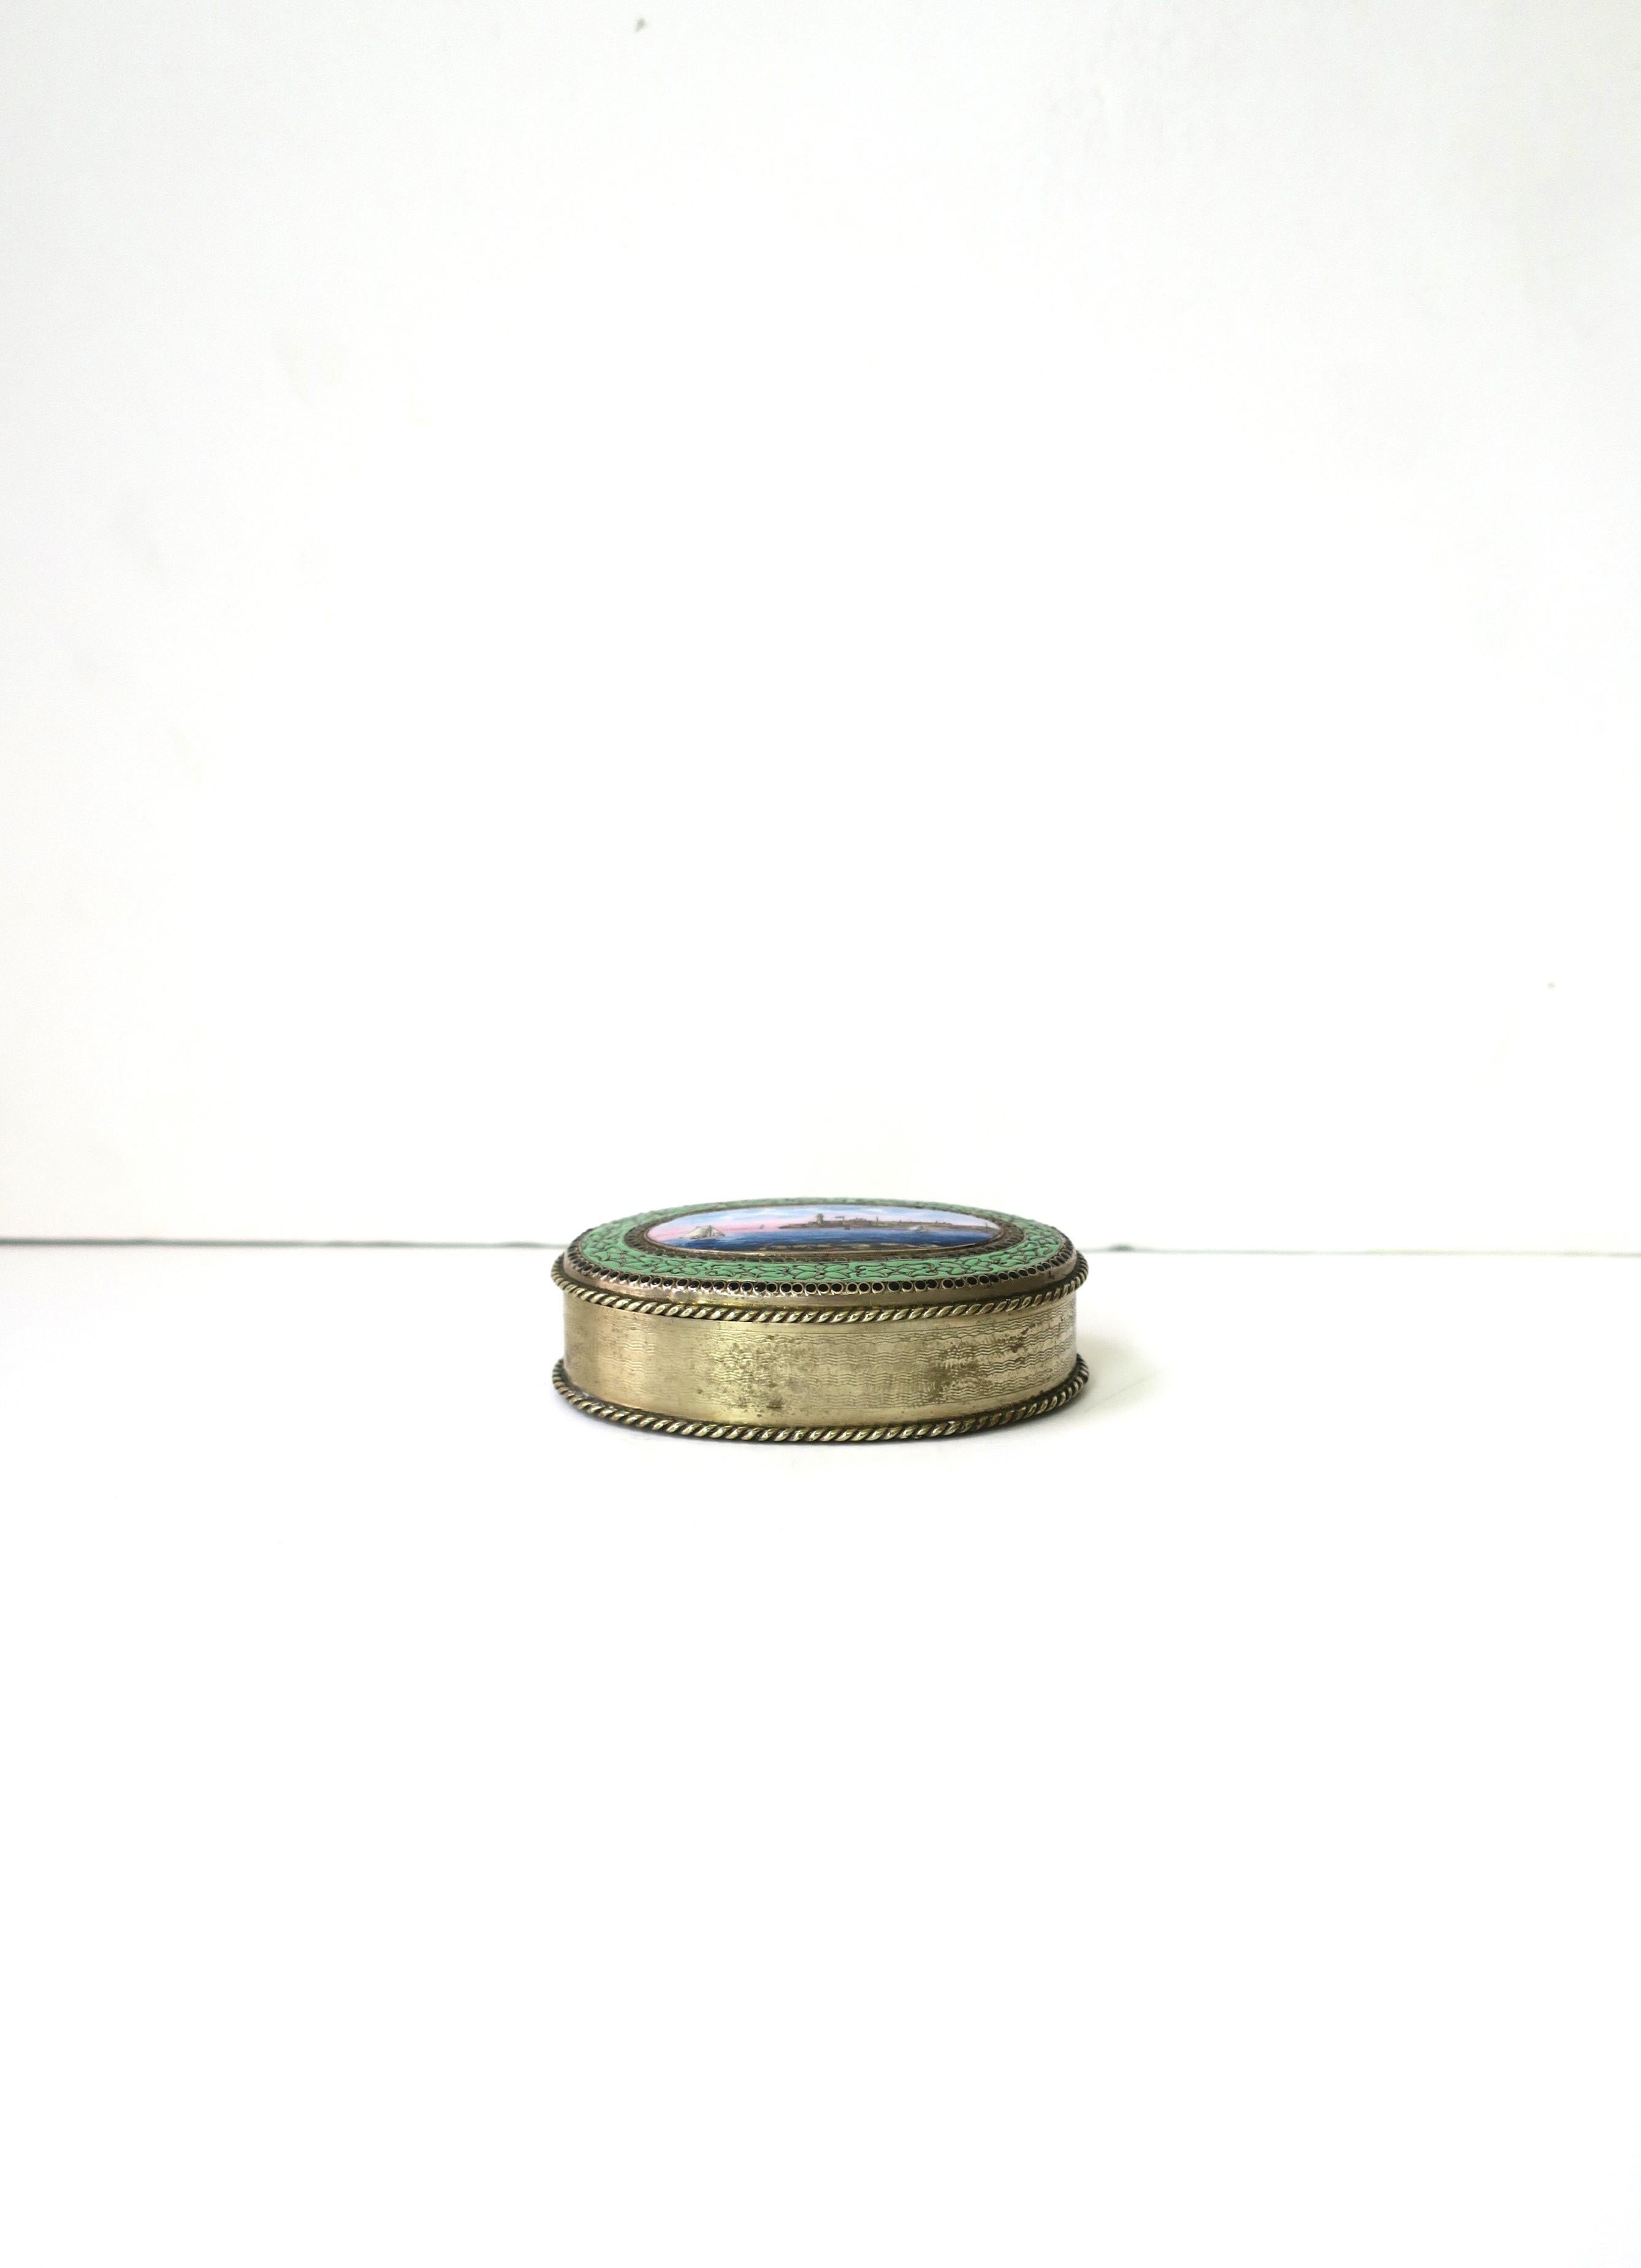 Havana Cuba Morro Castle Trinket Box Alpacca Metal and Enamel  In Good Condition For Sale In New York, NY